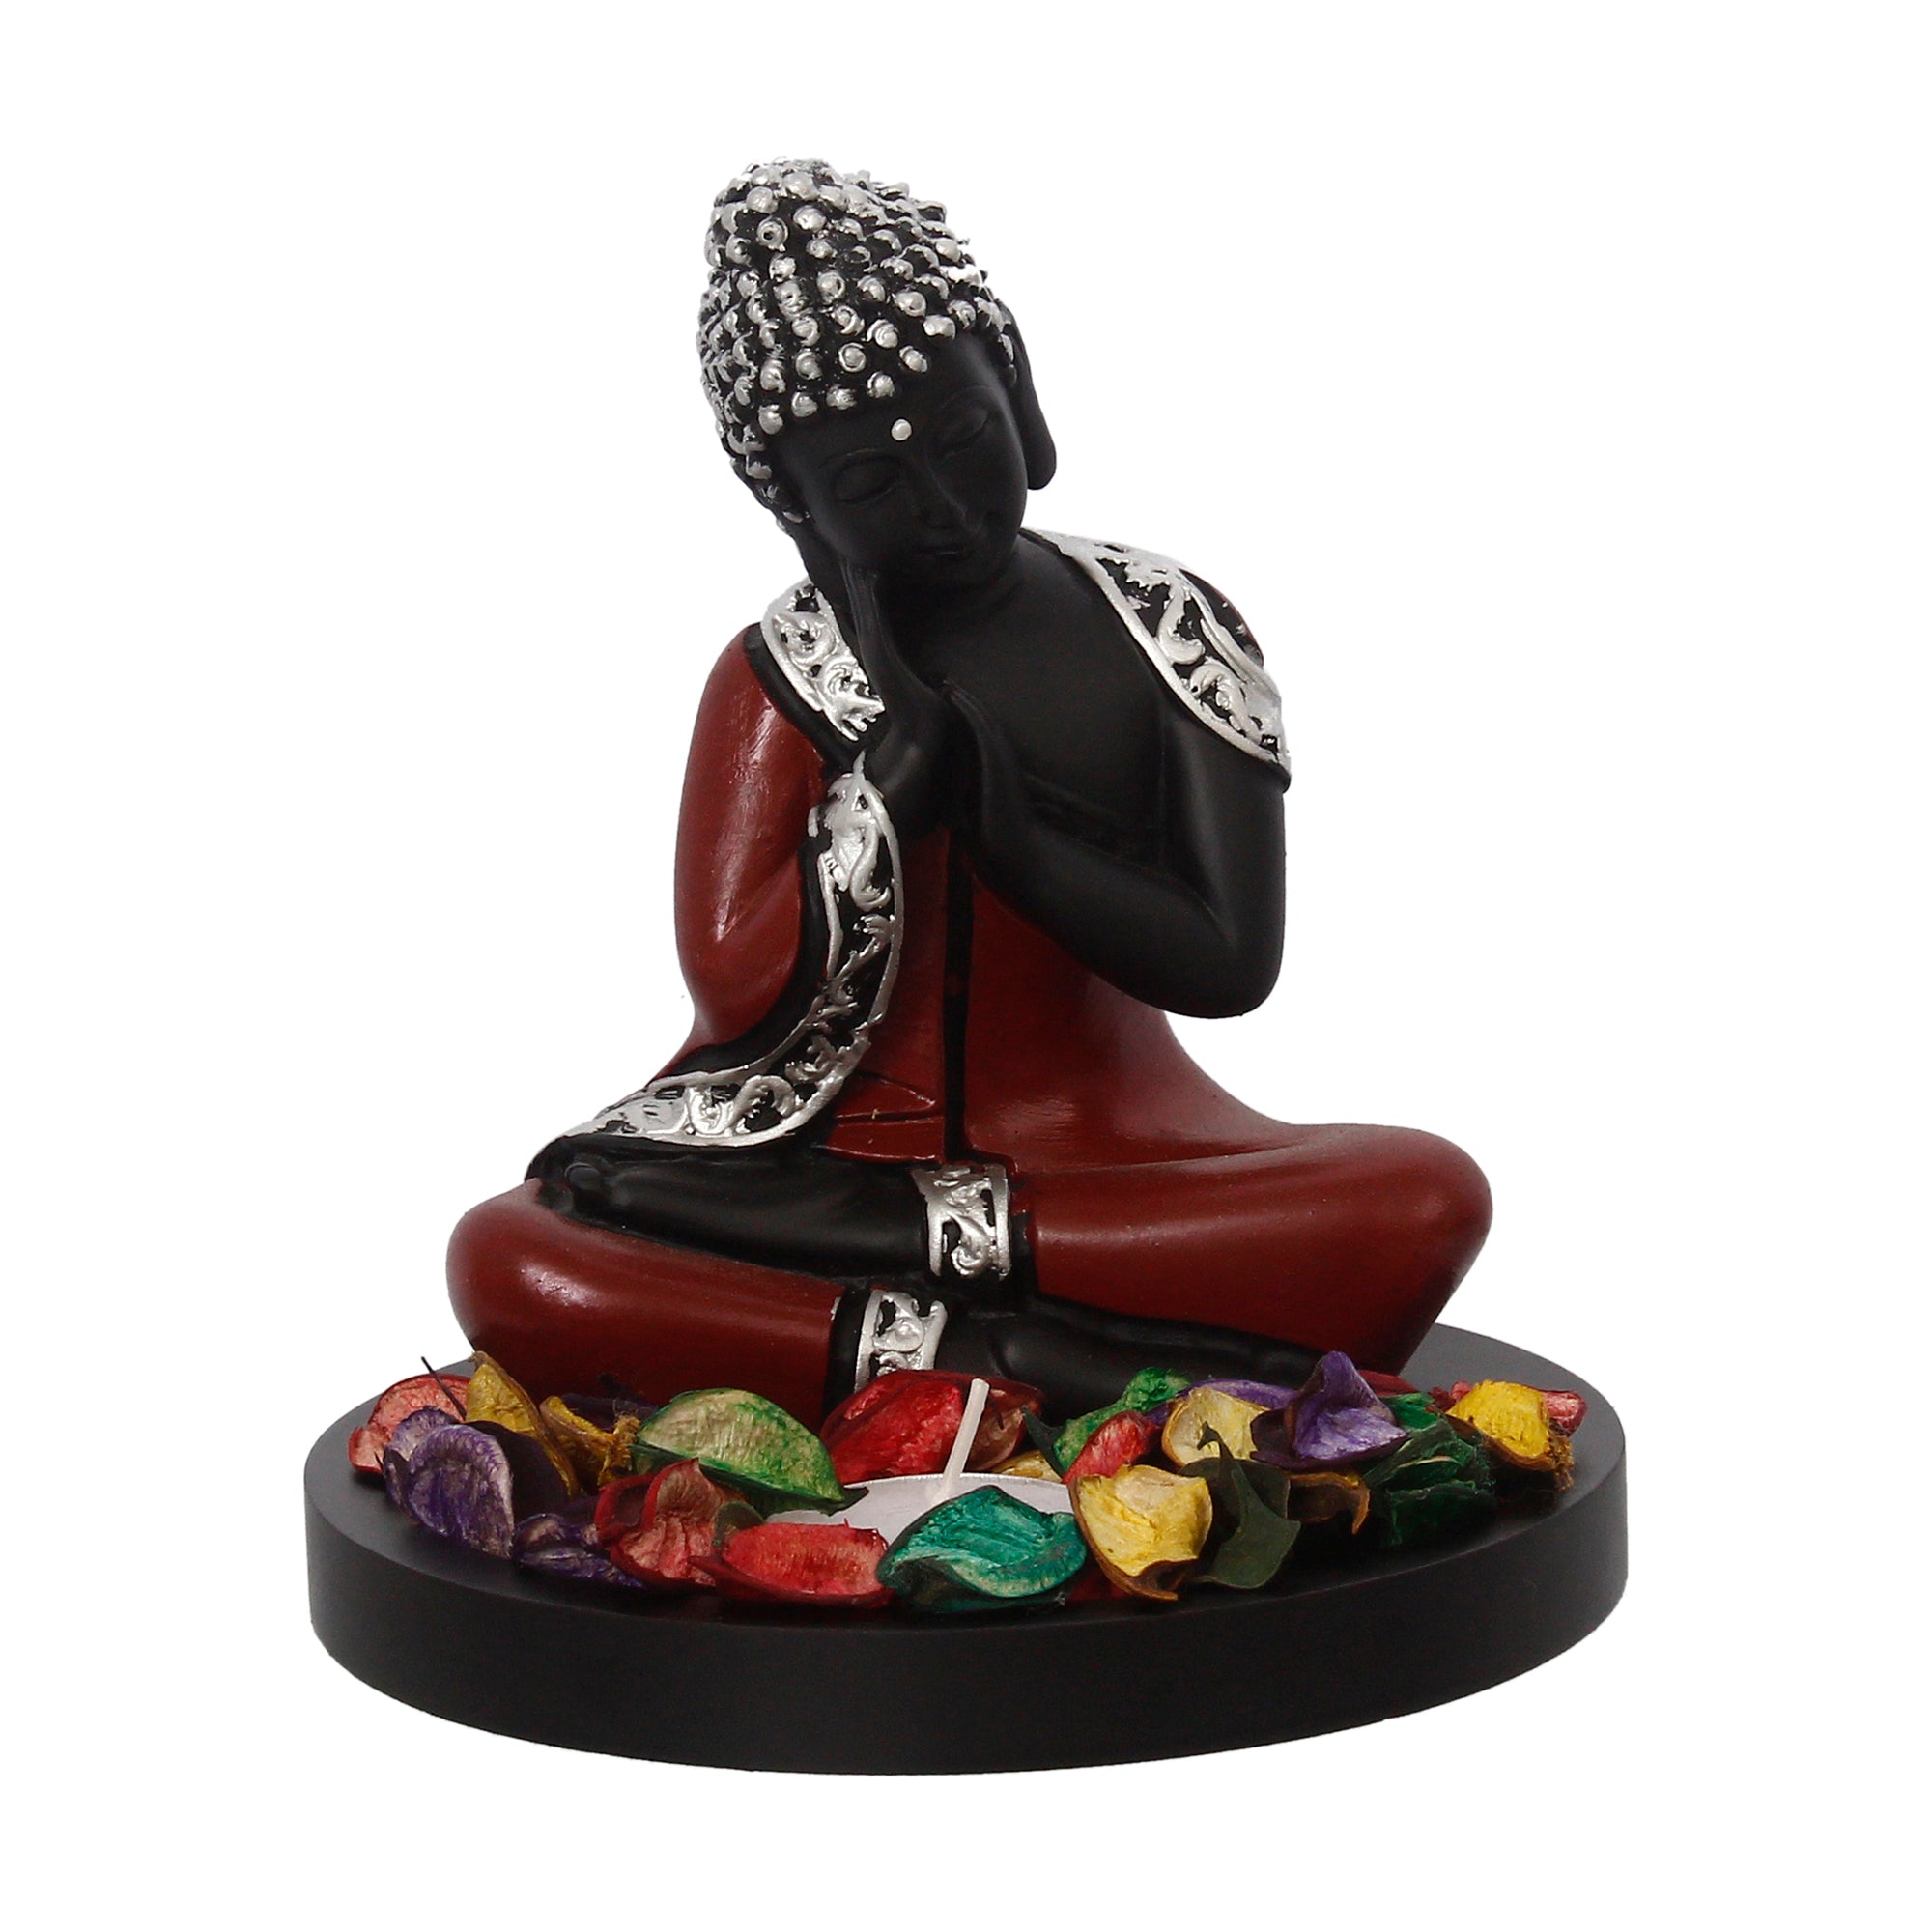 Polyresin Antique Finish Handcrafted Thinking Buddha Statue with Wooden Base, Fragranced Petals and Tealight (Red, Black and Silver) 2